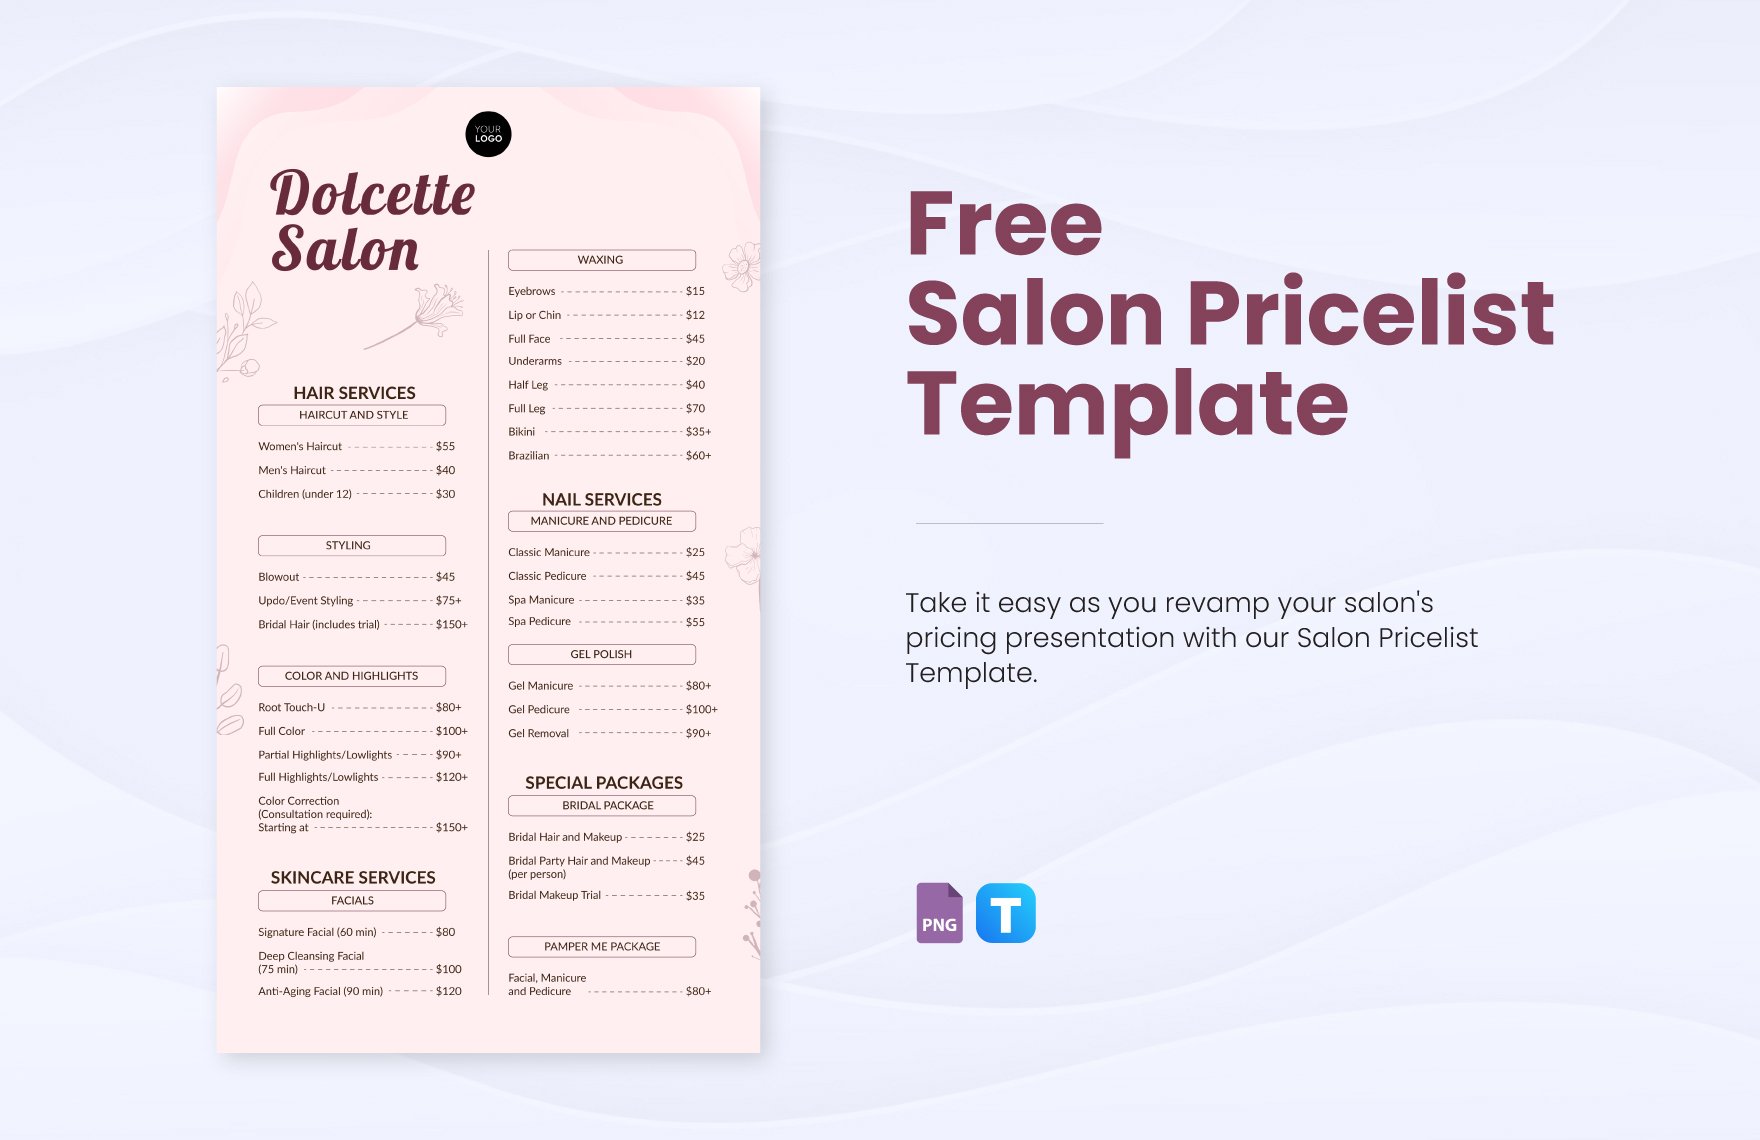 Free Salon Pricelist Template in PNG